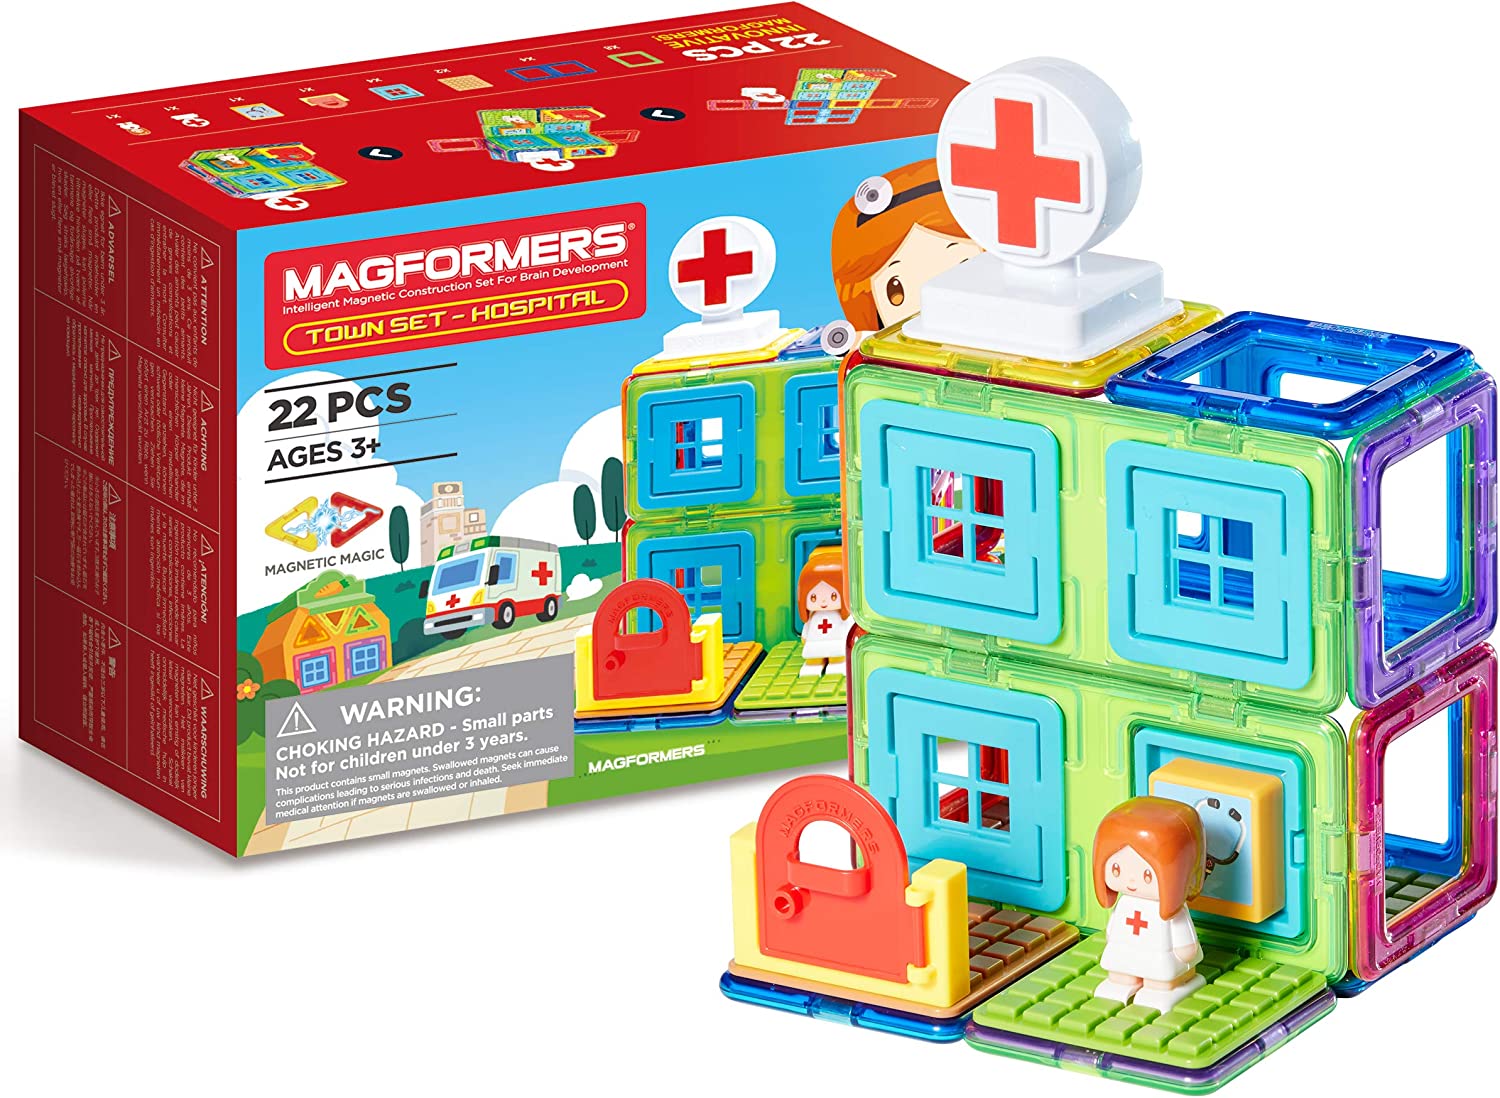 Magformers Town Set - Hospital